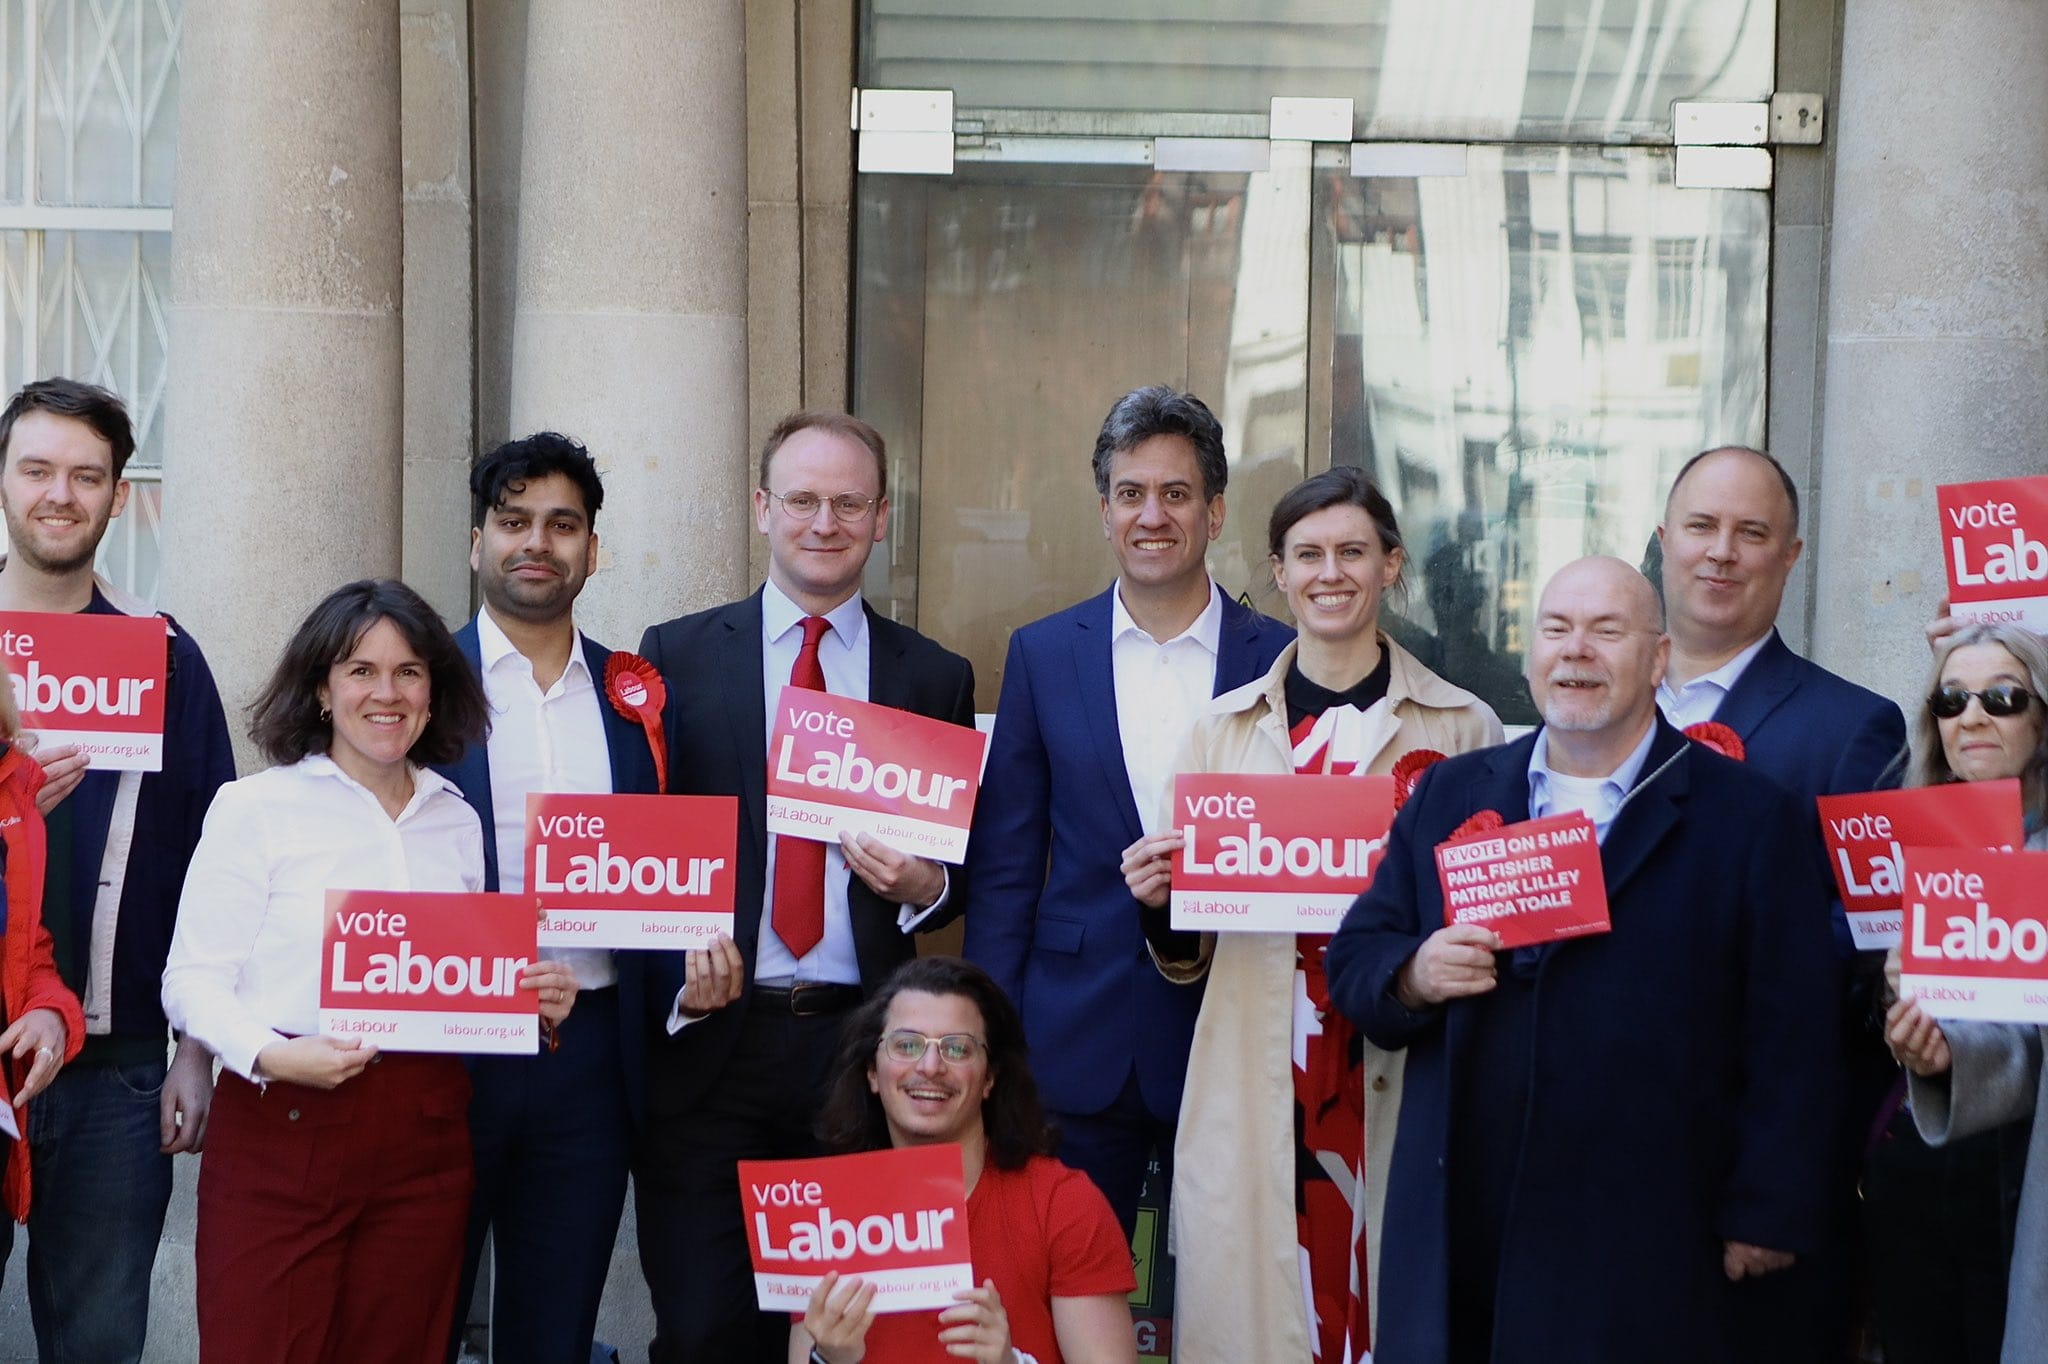 Members campaigning the West End ward in the 2022 elections